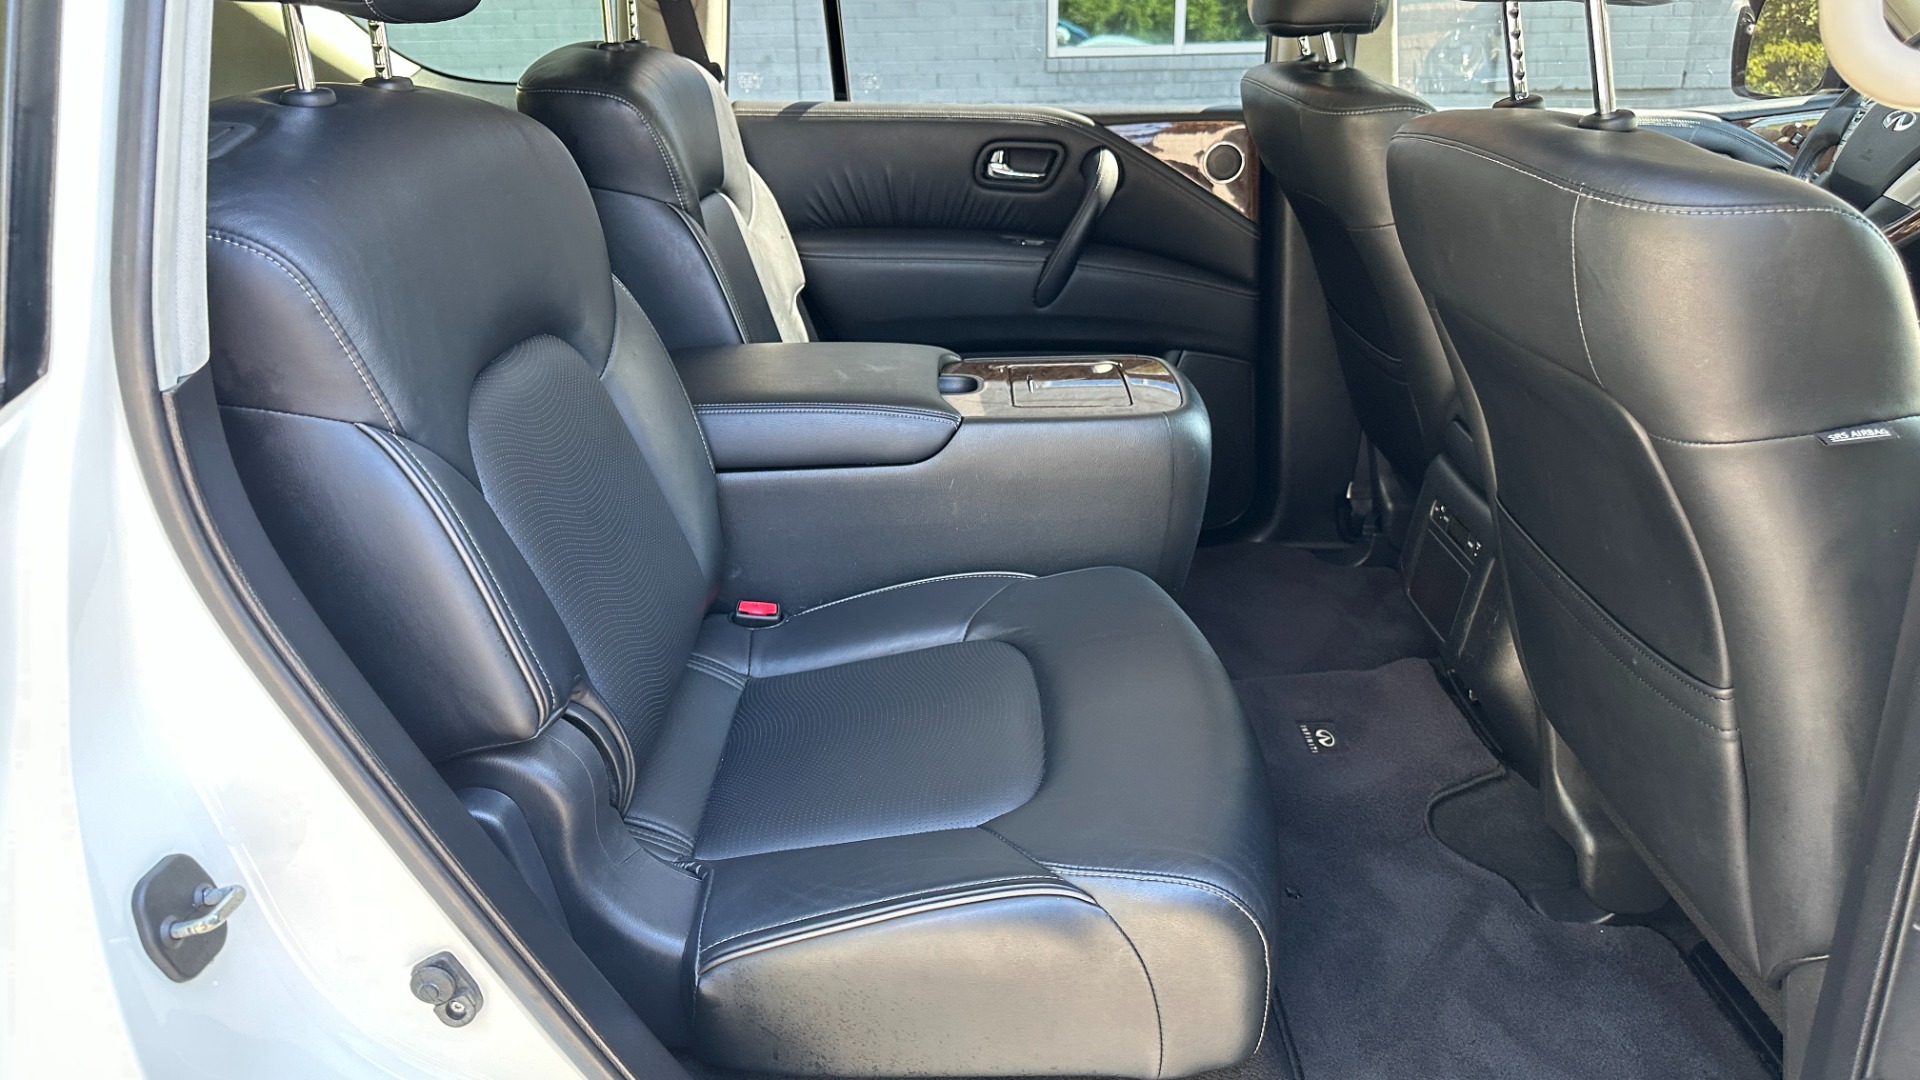 Used 2017 INFINITI QX80 SIGNATURE EDITION / 3 ROW SEATING / NAV / LEATHER for sale $25,995 at Formula Imports in Charlotte NC 28227 32